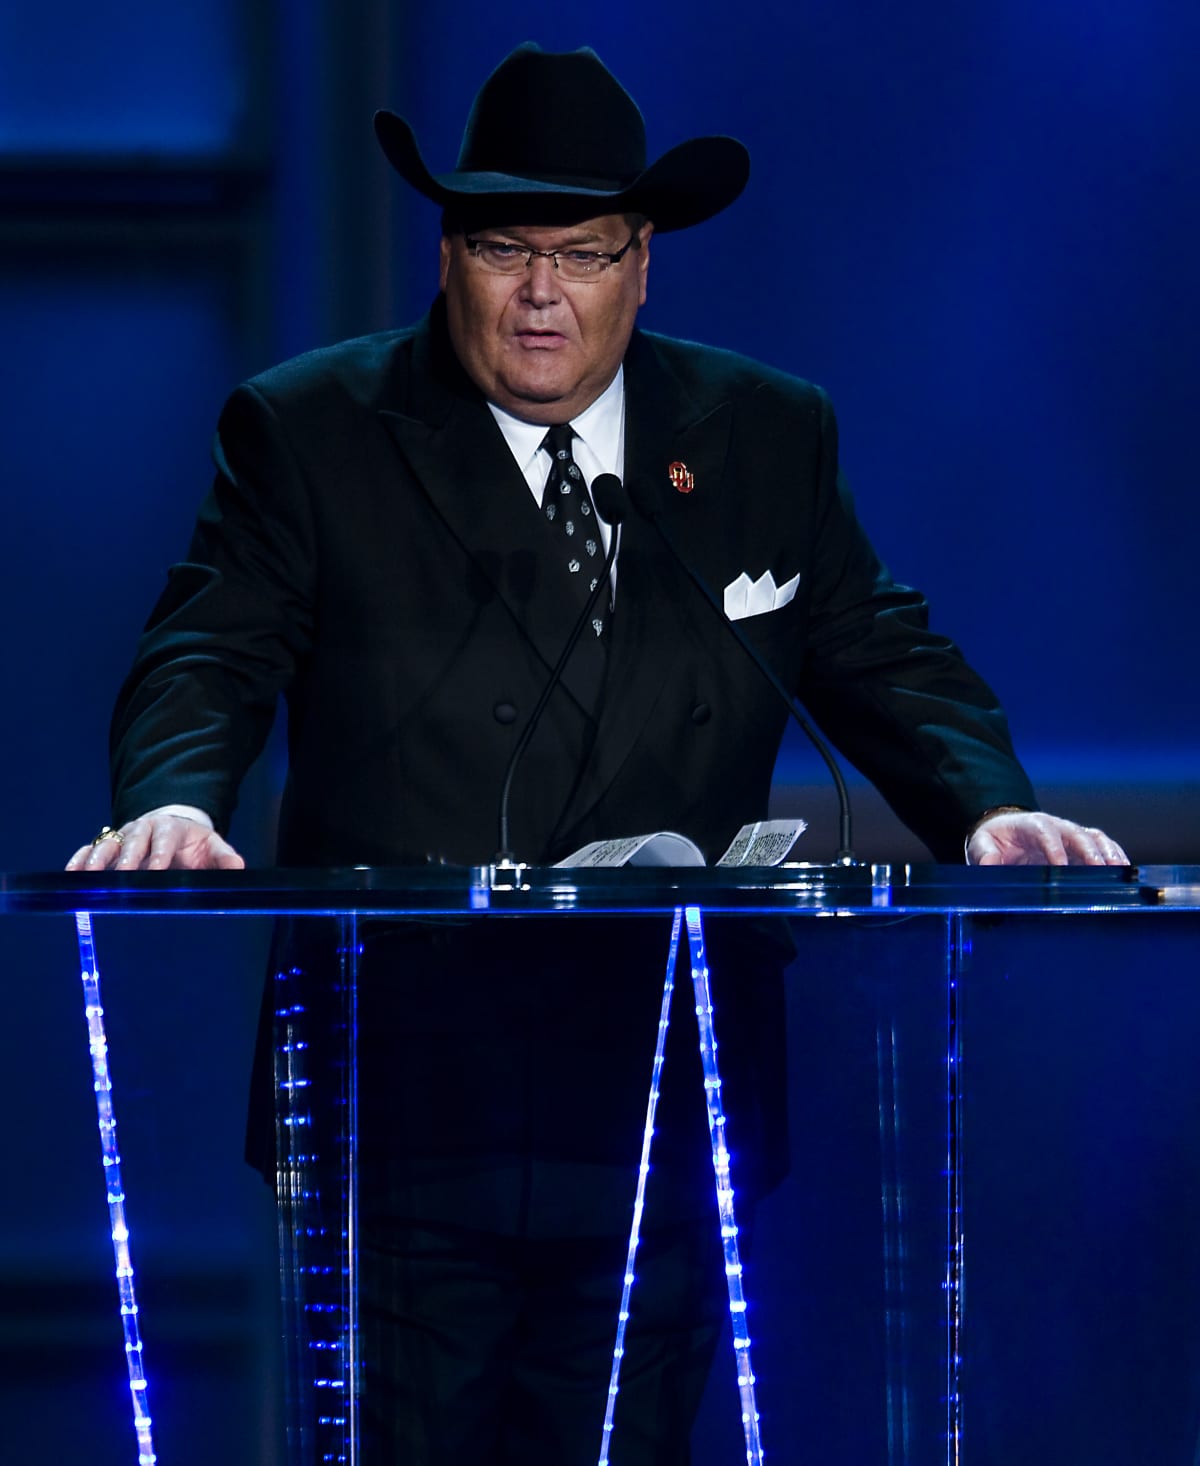 HOUSTON - APRIL 04:  WWE television commentator Jim Ross attends the 25th Anniversary of WrestleMania's WWE Hall of Fame at the Toyota Center on April 4, 2009 in Houston, Texas.  (Photo by Bob Levey/WireImage)